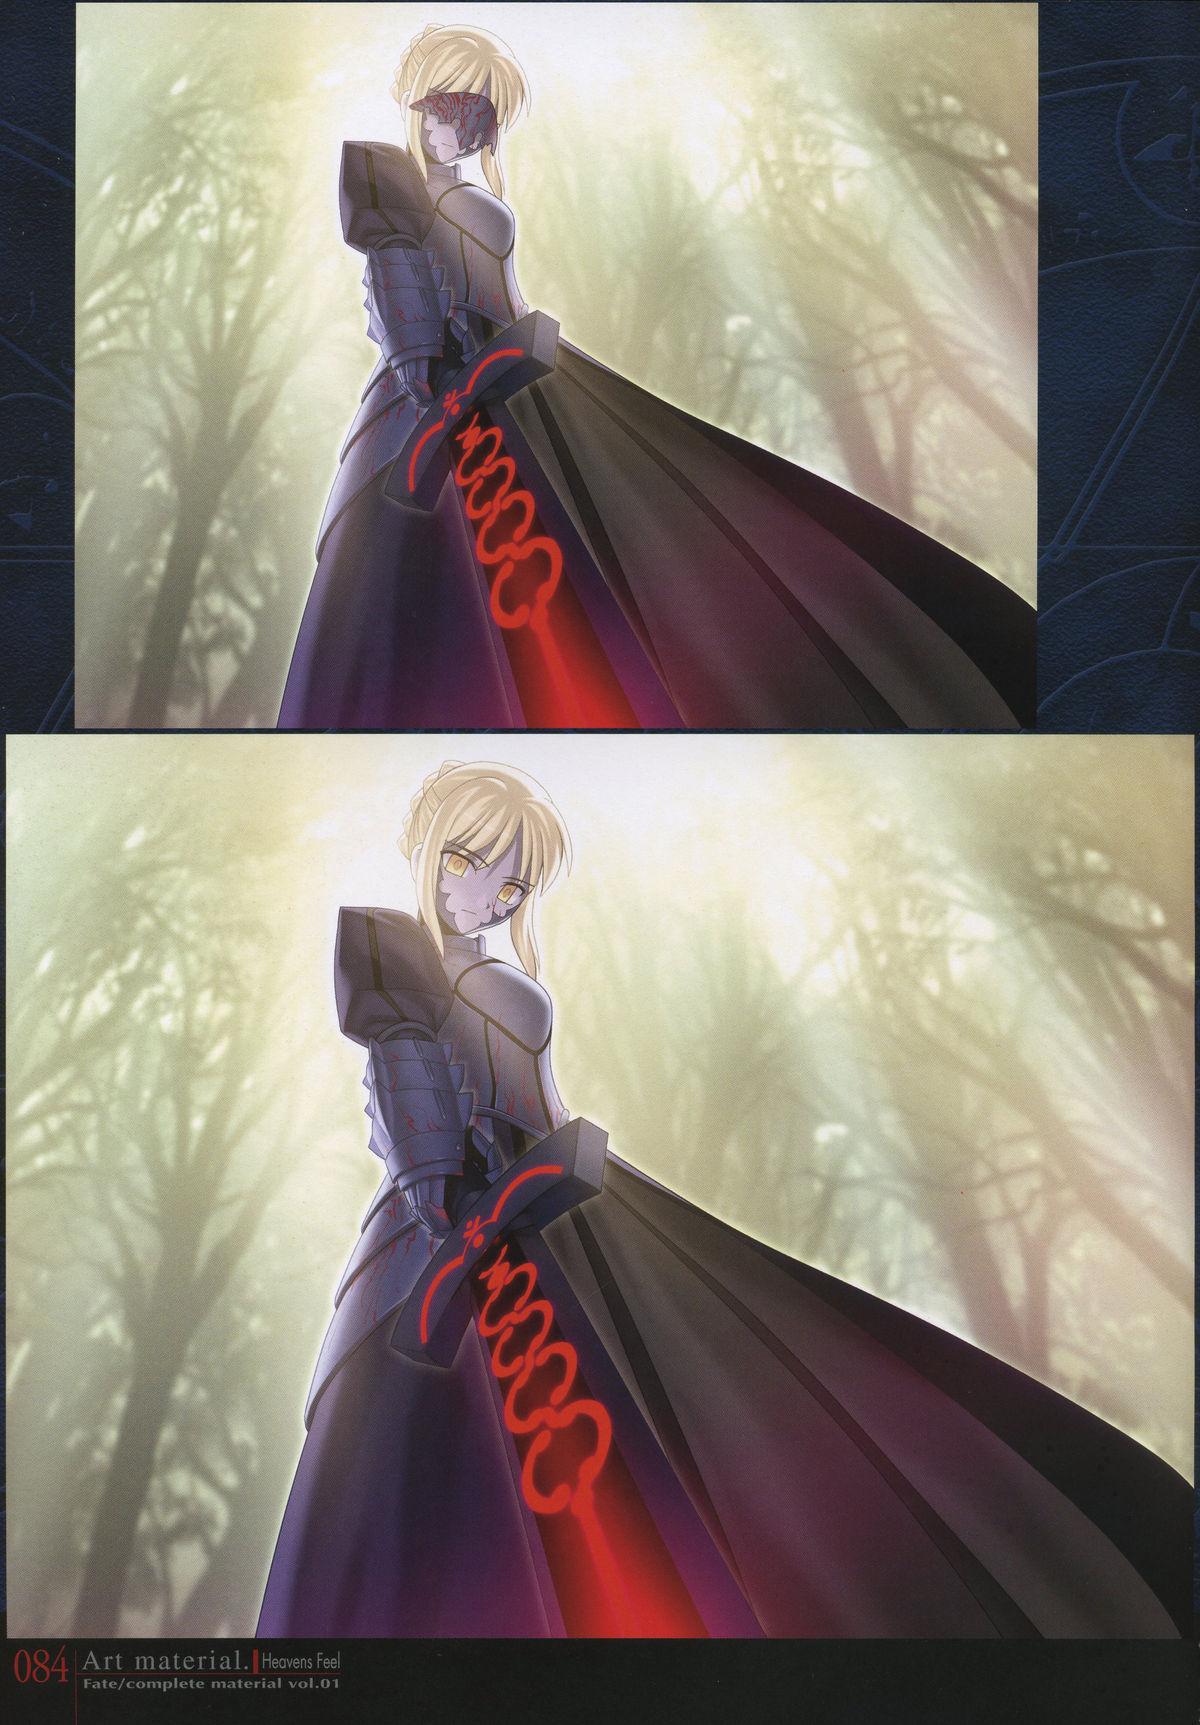 Fate/complete material I - Art material. 88